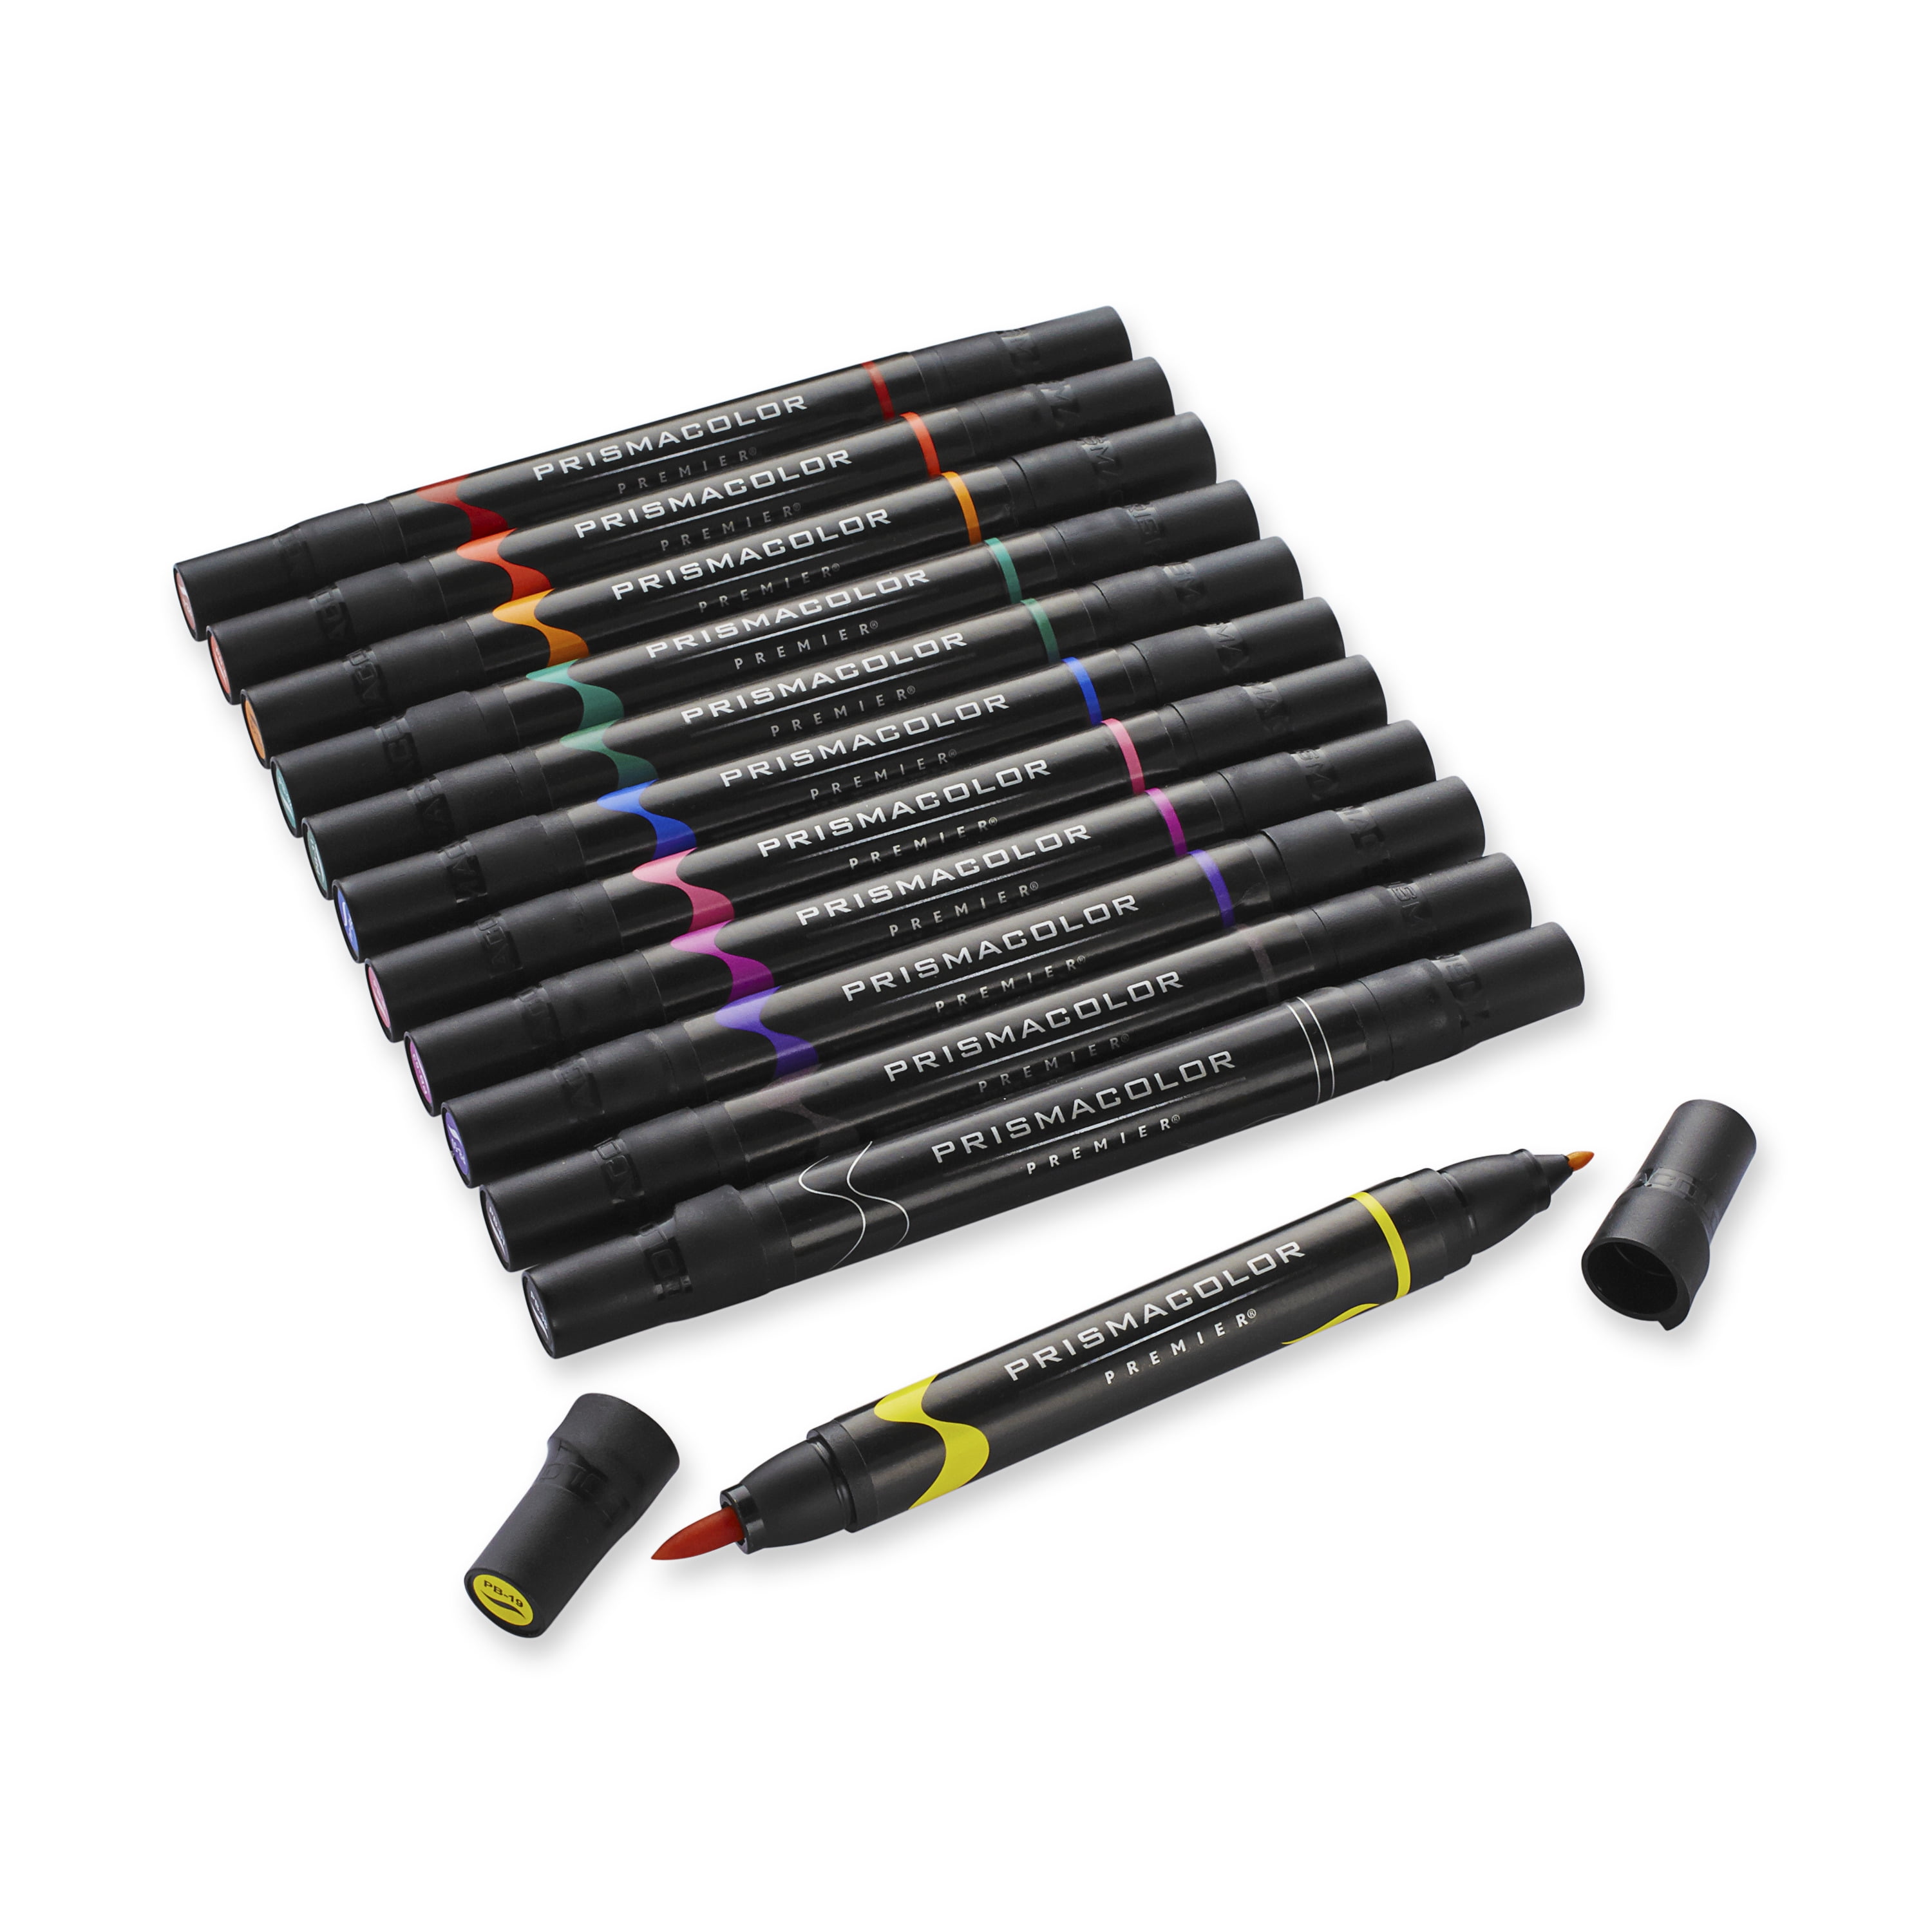  Prismacolor 1776353 Premier Double-Ended Art Markers, Fine and  Brush Tip, 24-Count with Carrying Case : Permanent Markers : Arts, Crafts &  Sewing